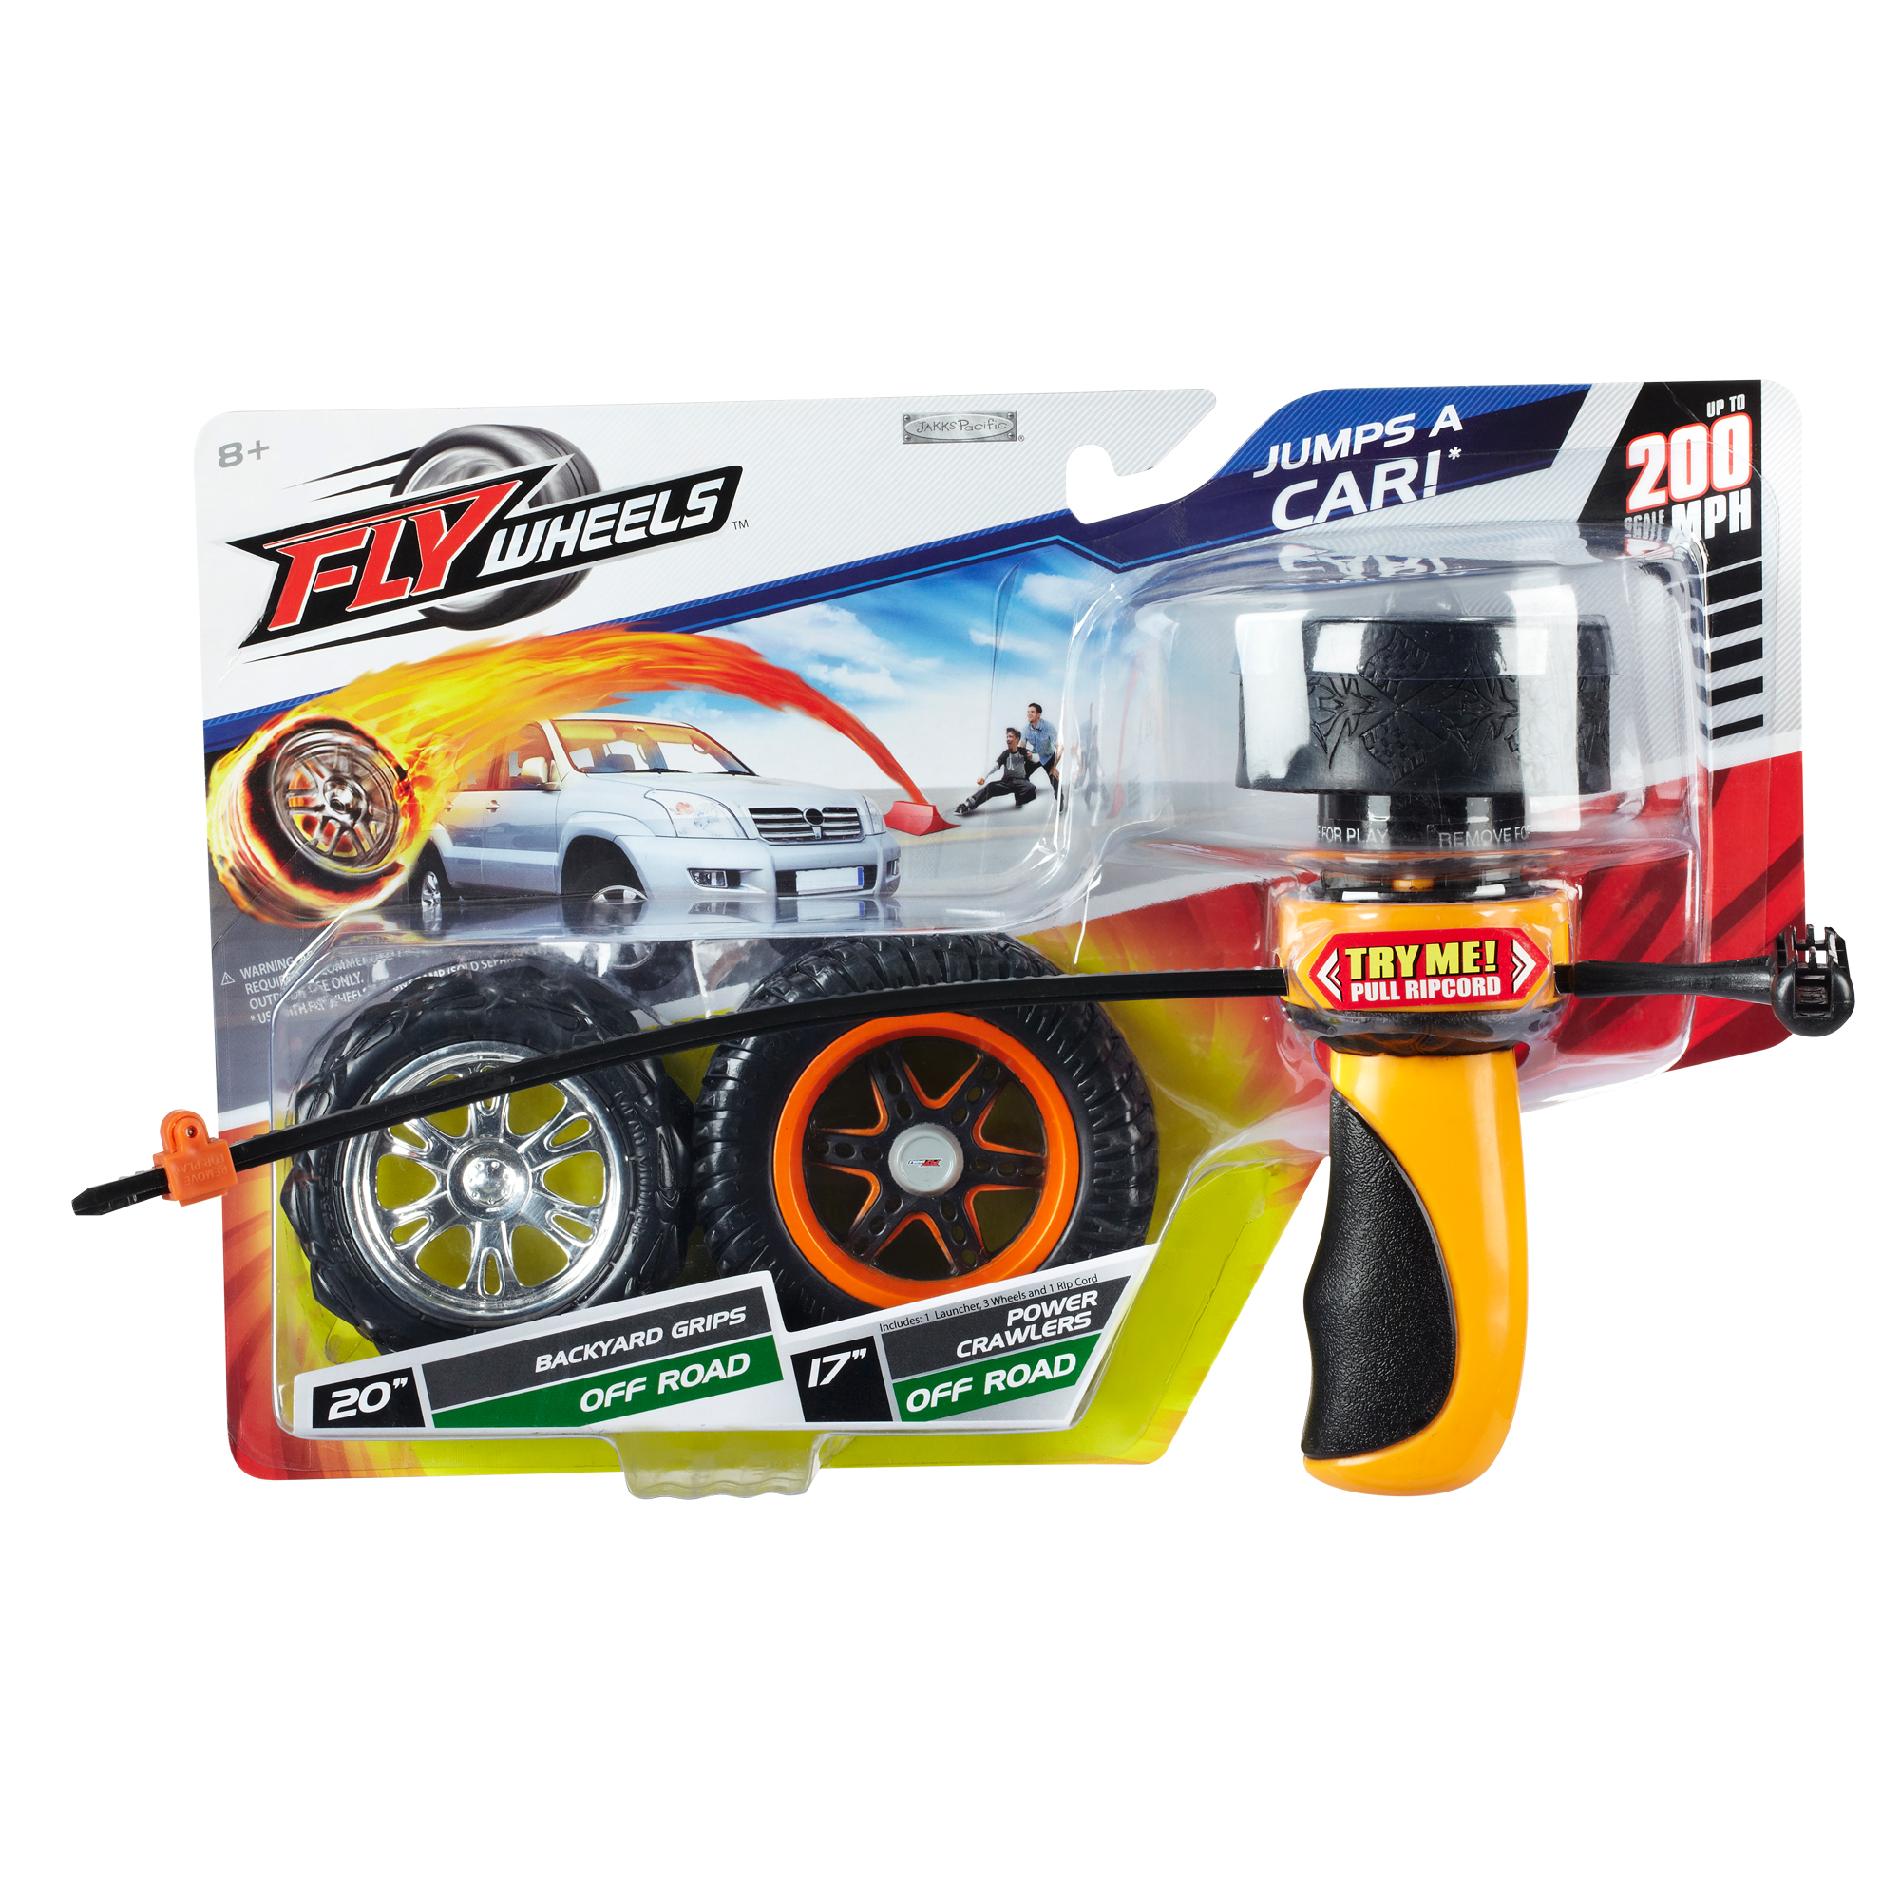 Fly Wheels Deluxe 3pk Power Crawlers Off Road